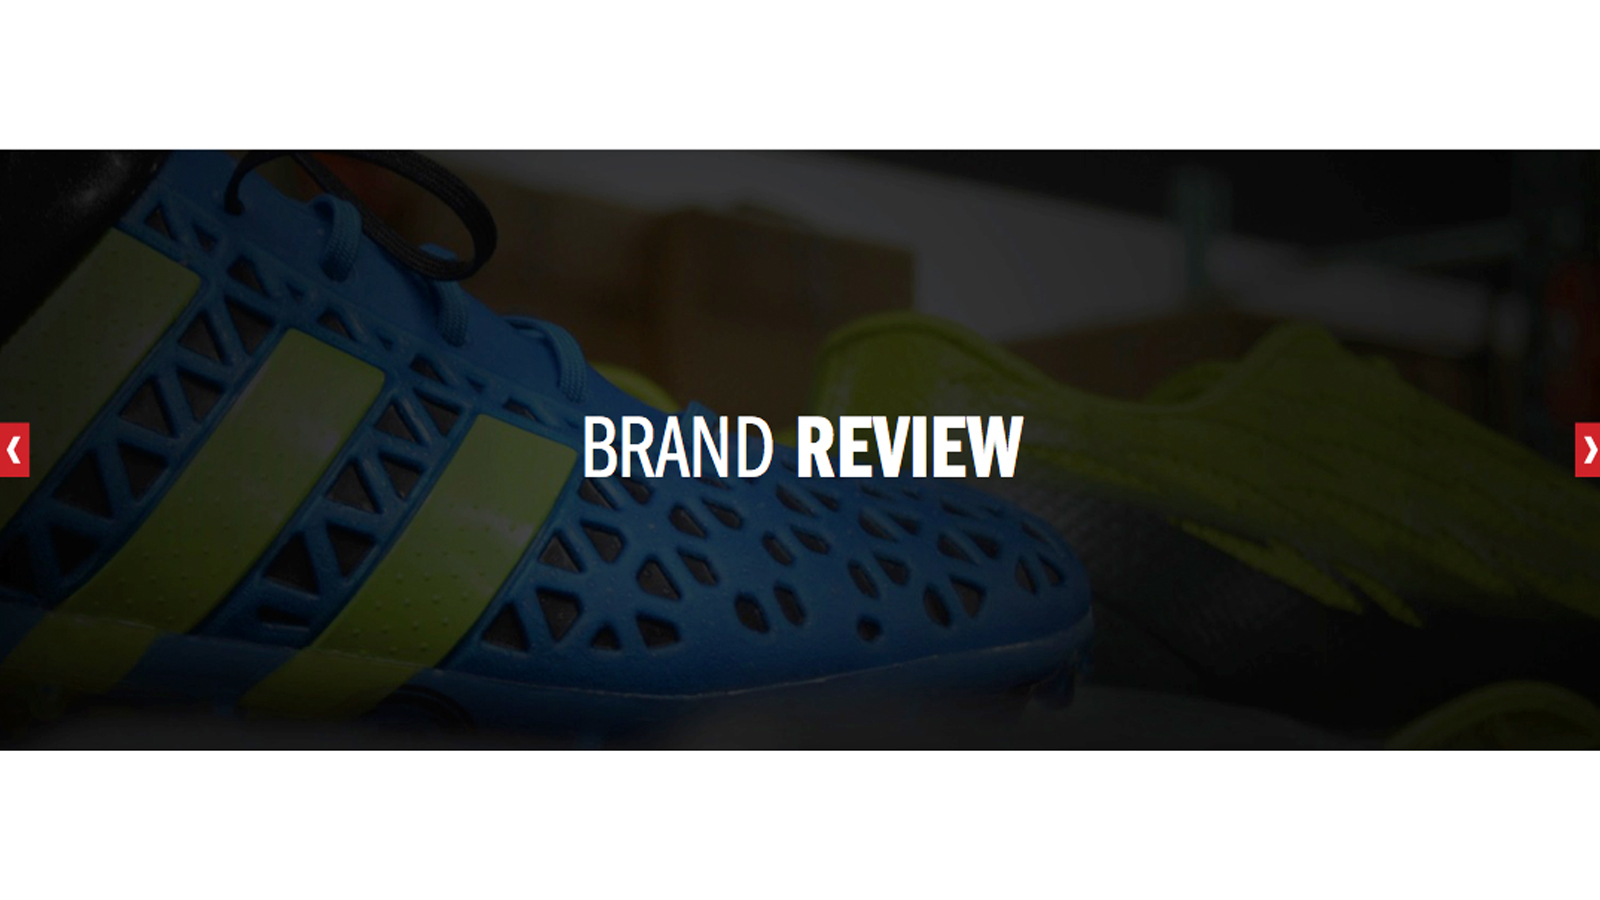  Brand Review 